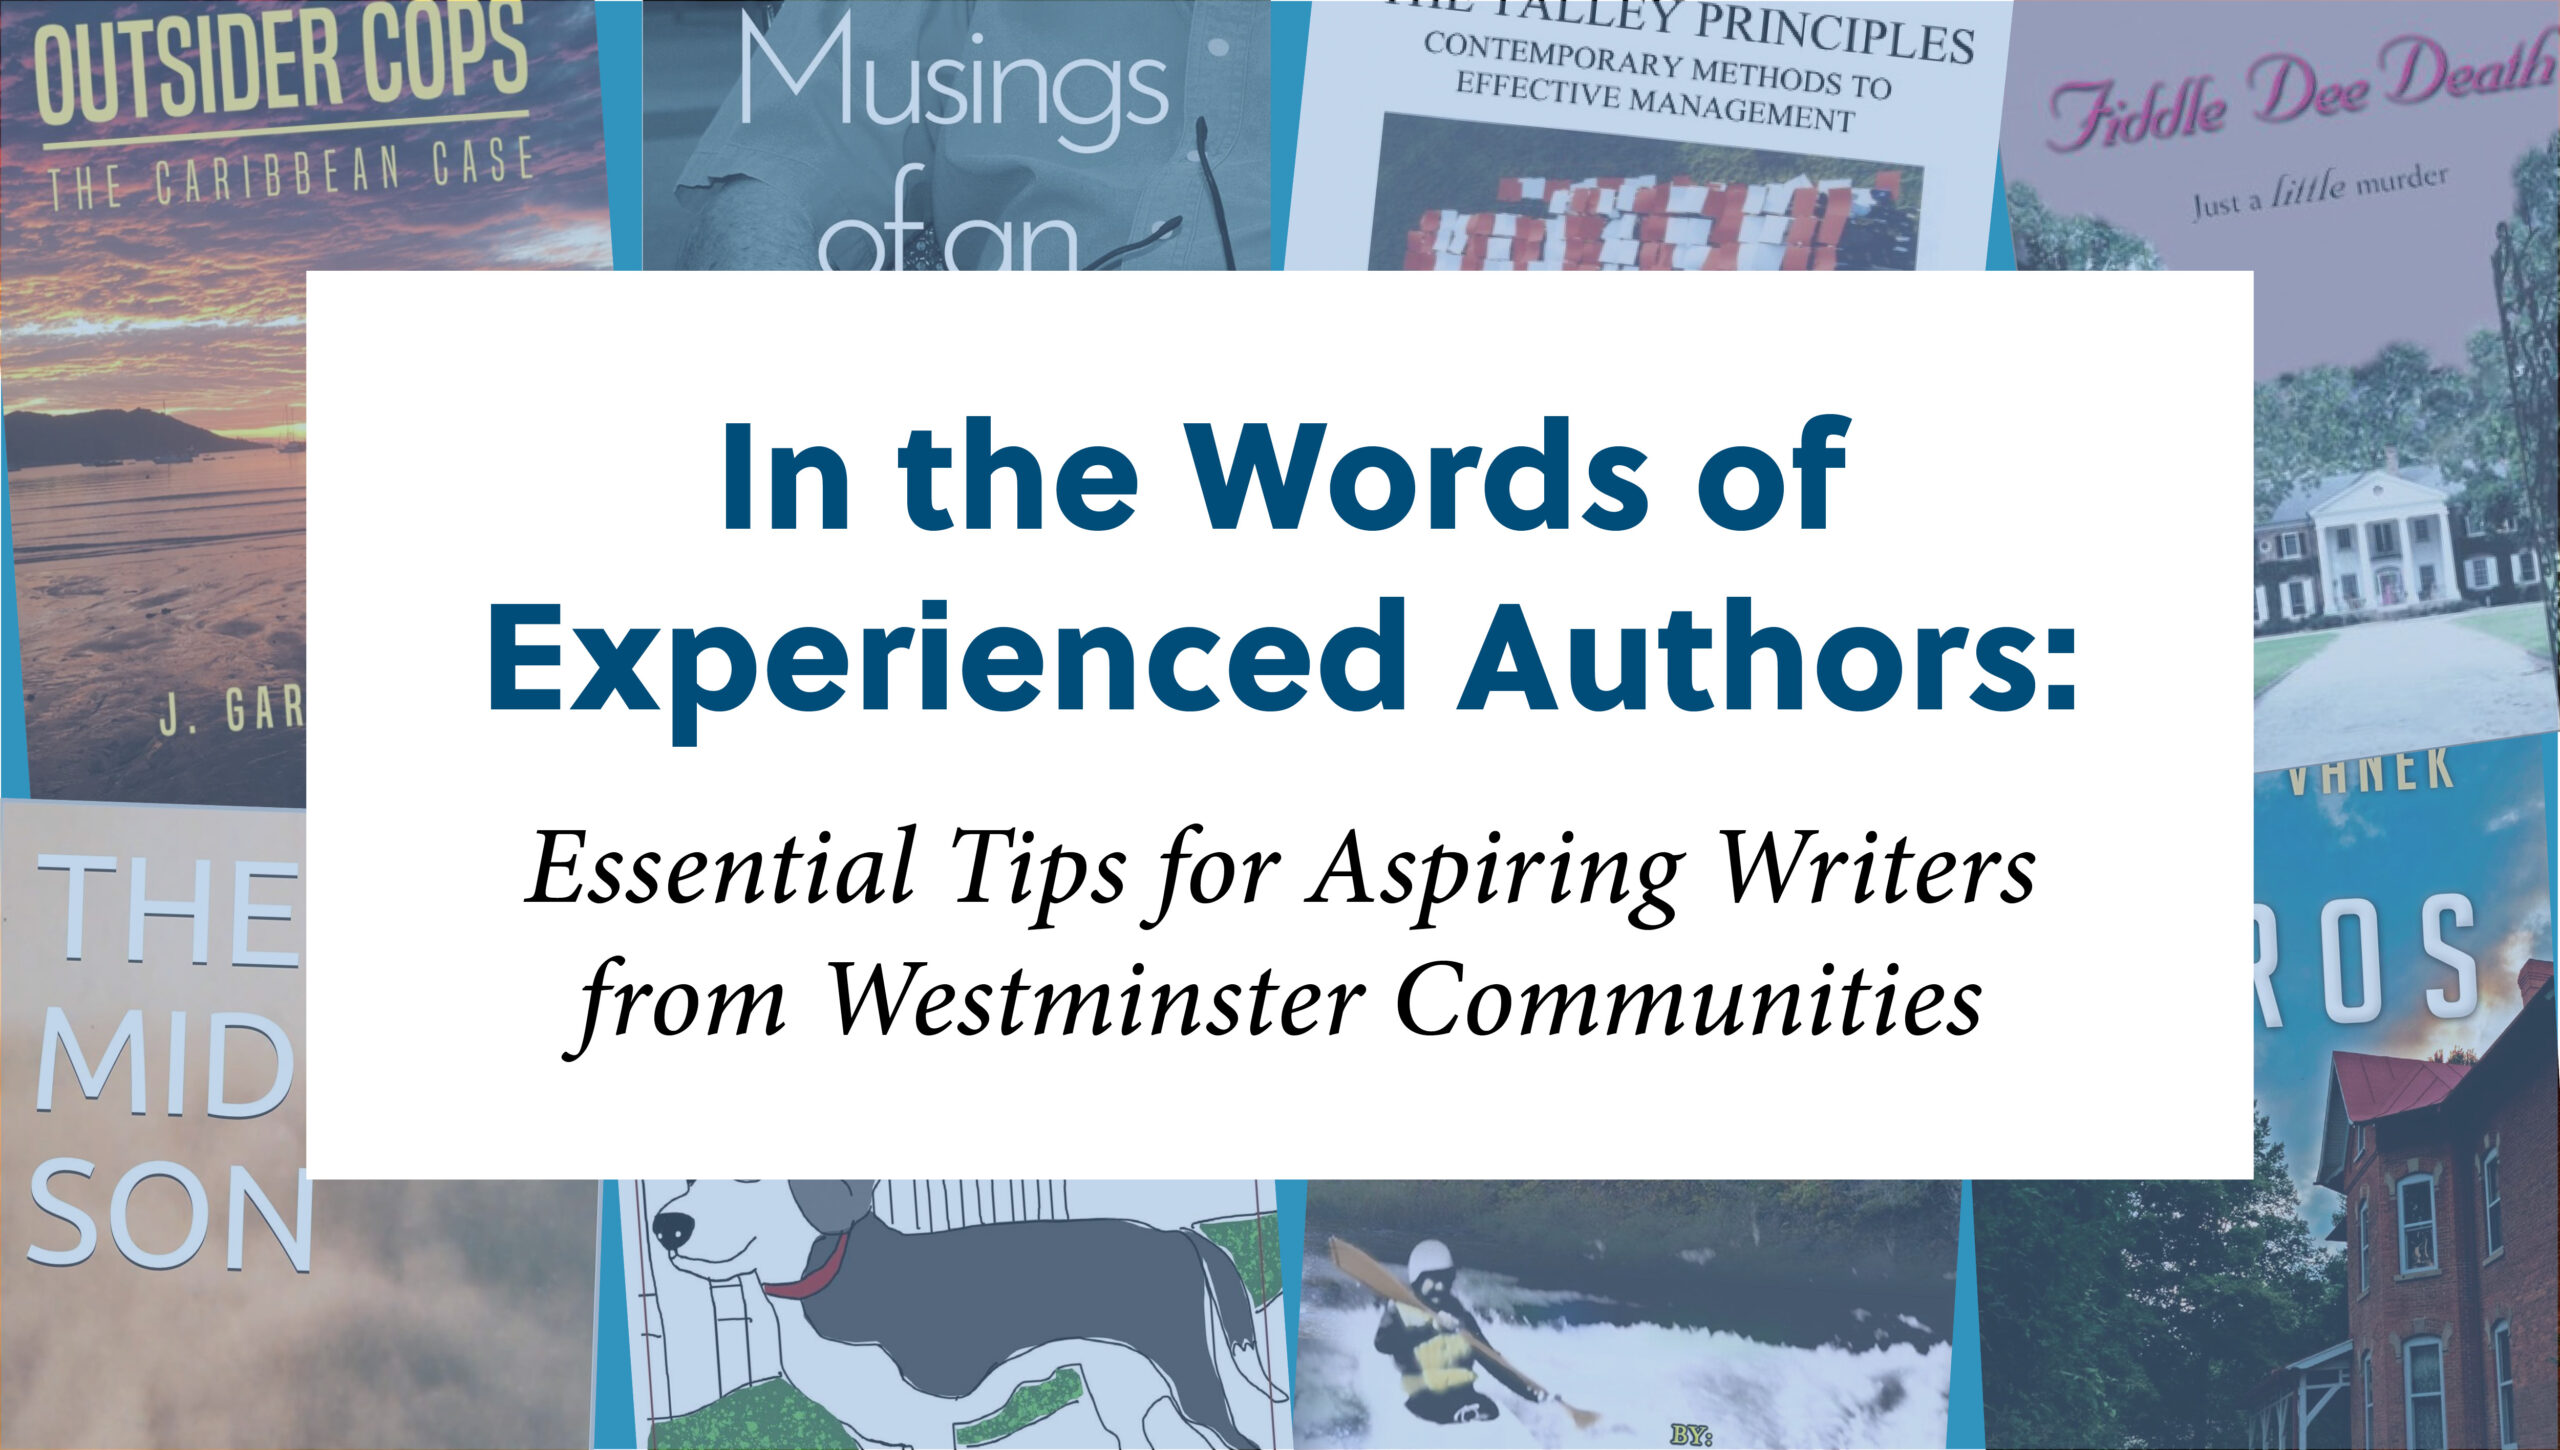 In the Words of Experienced Authors: Essential Tips for Aspiring Writers from Westminster Communities